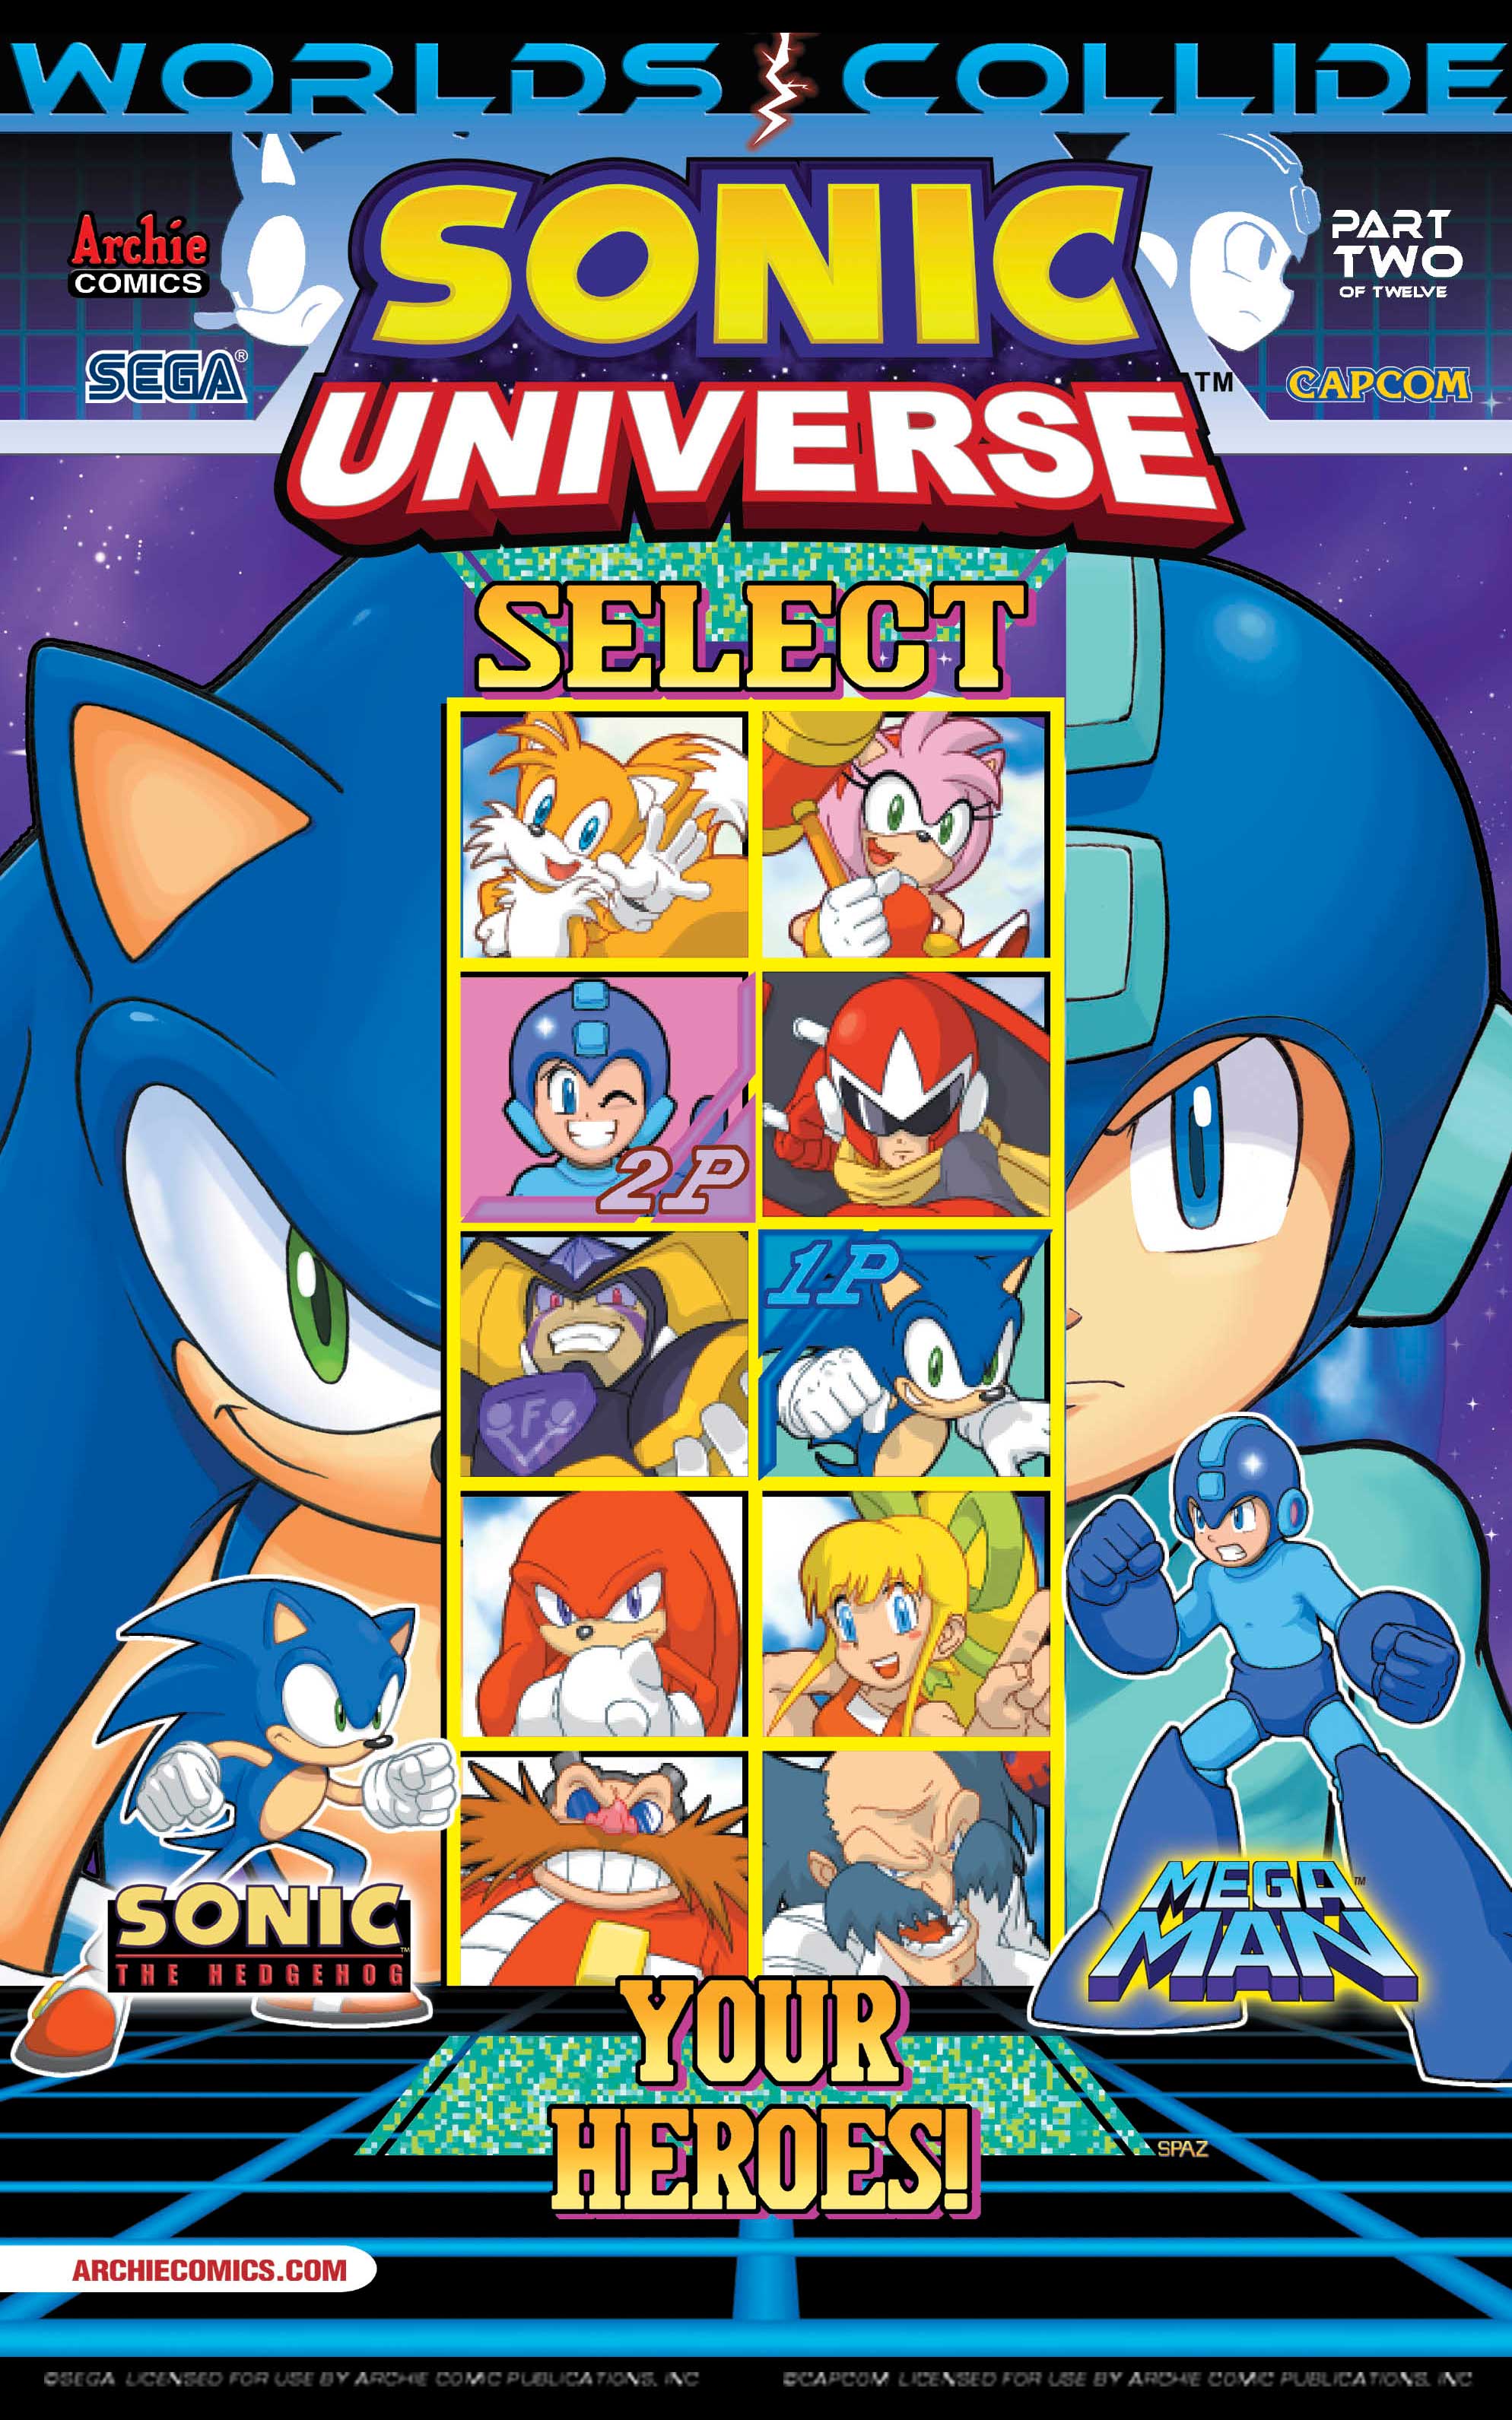 archie-sonic-and-mega-man-crossover-worlds-collide-part-2.jpg